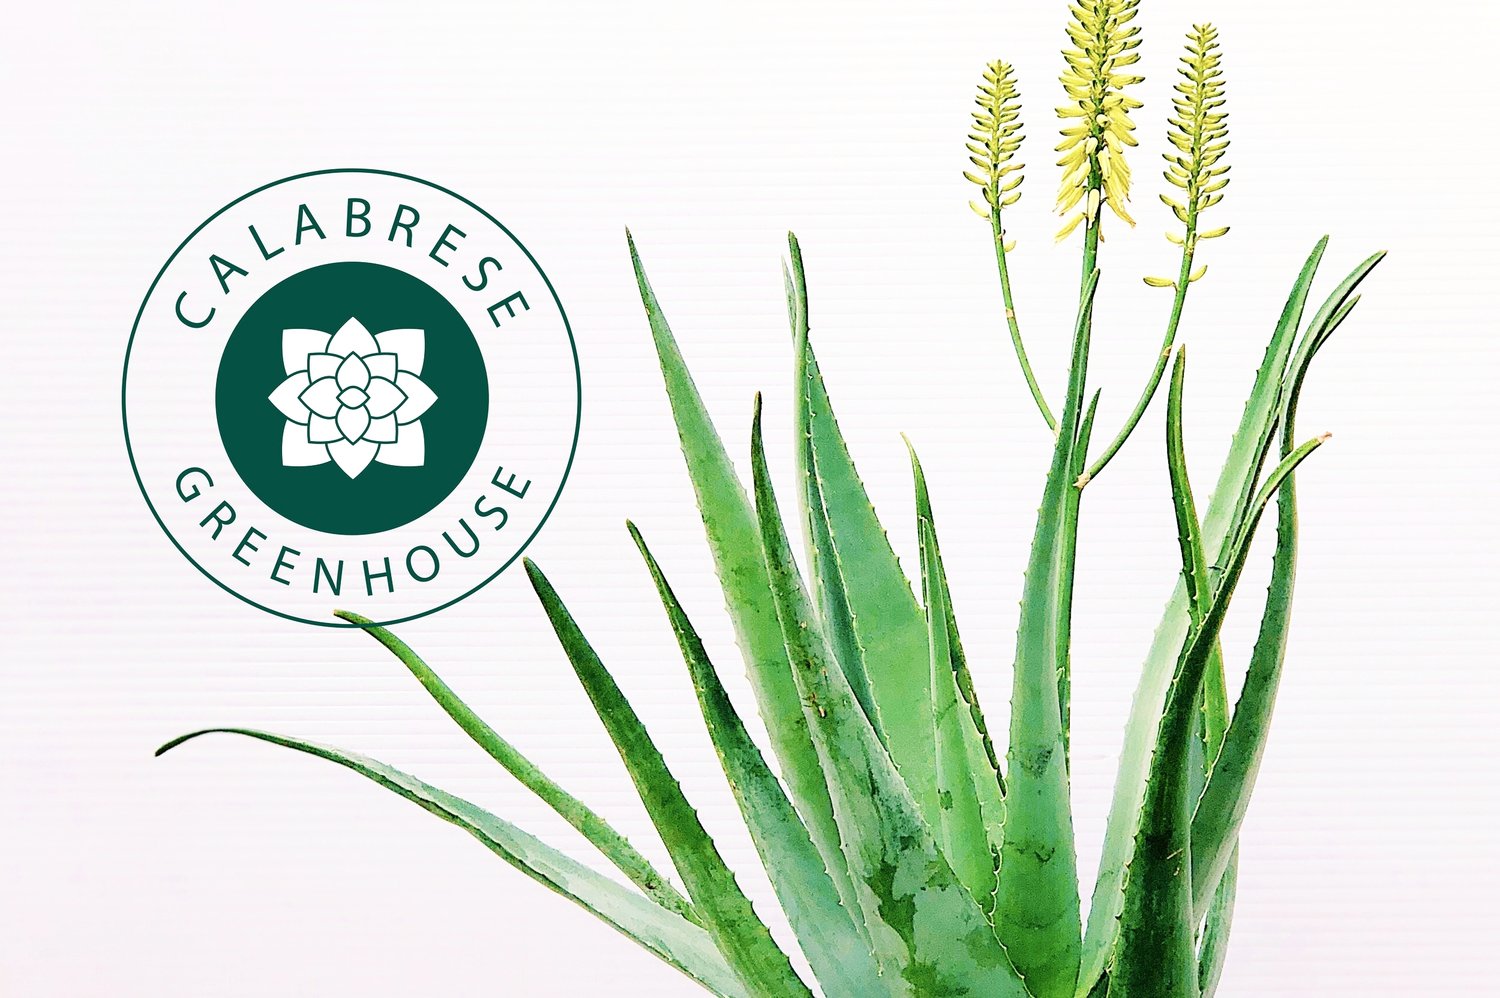 Company logo of Calabrese Greenhouse